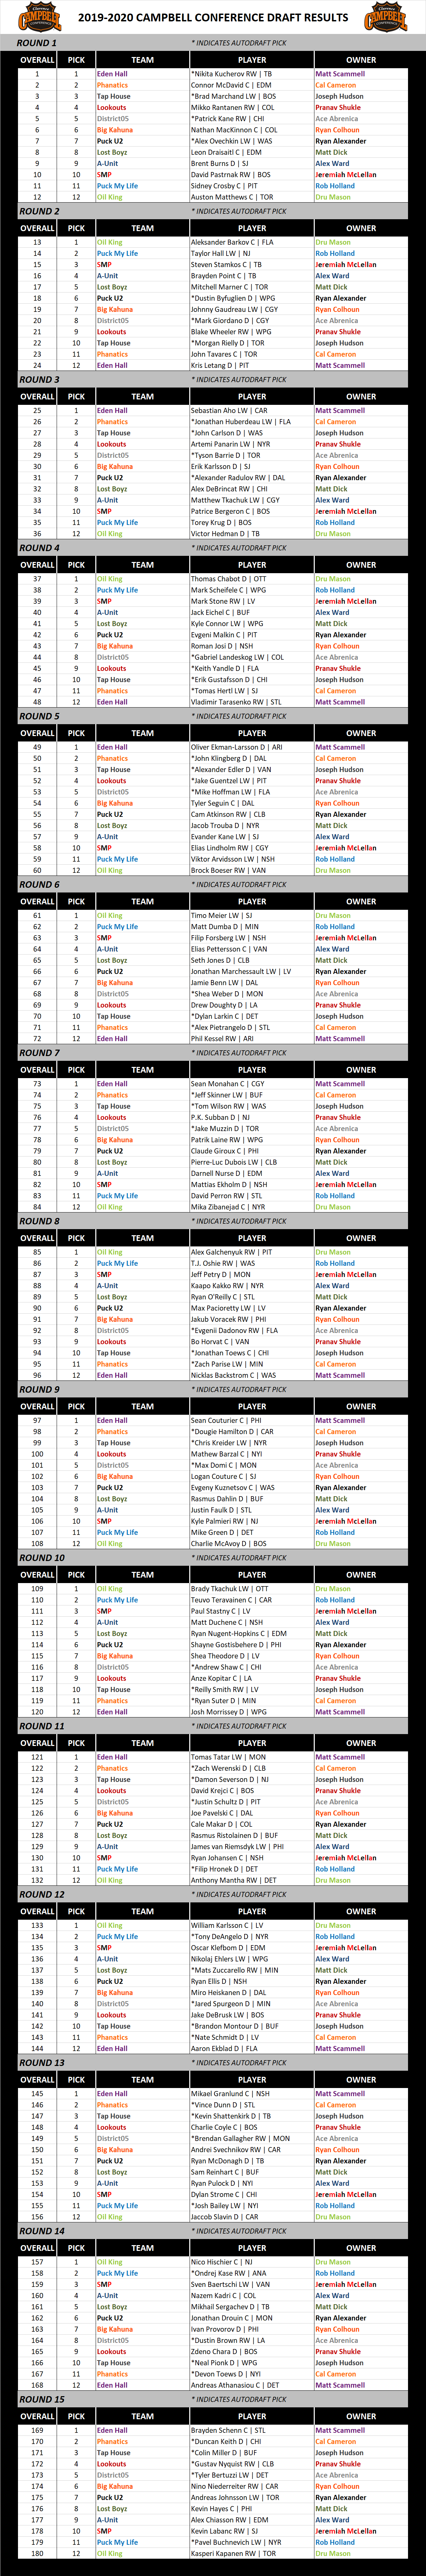 2019-2020 Campbell Conference Draft Results